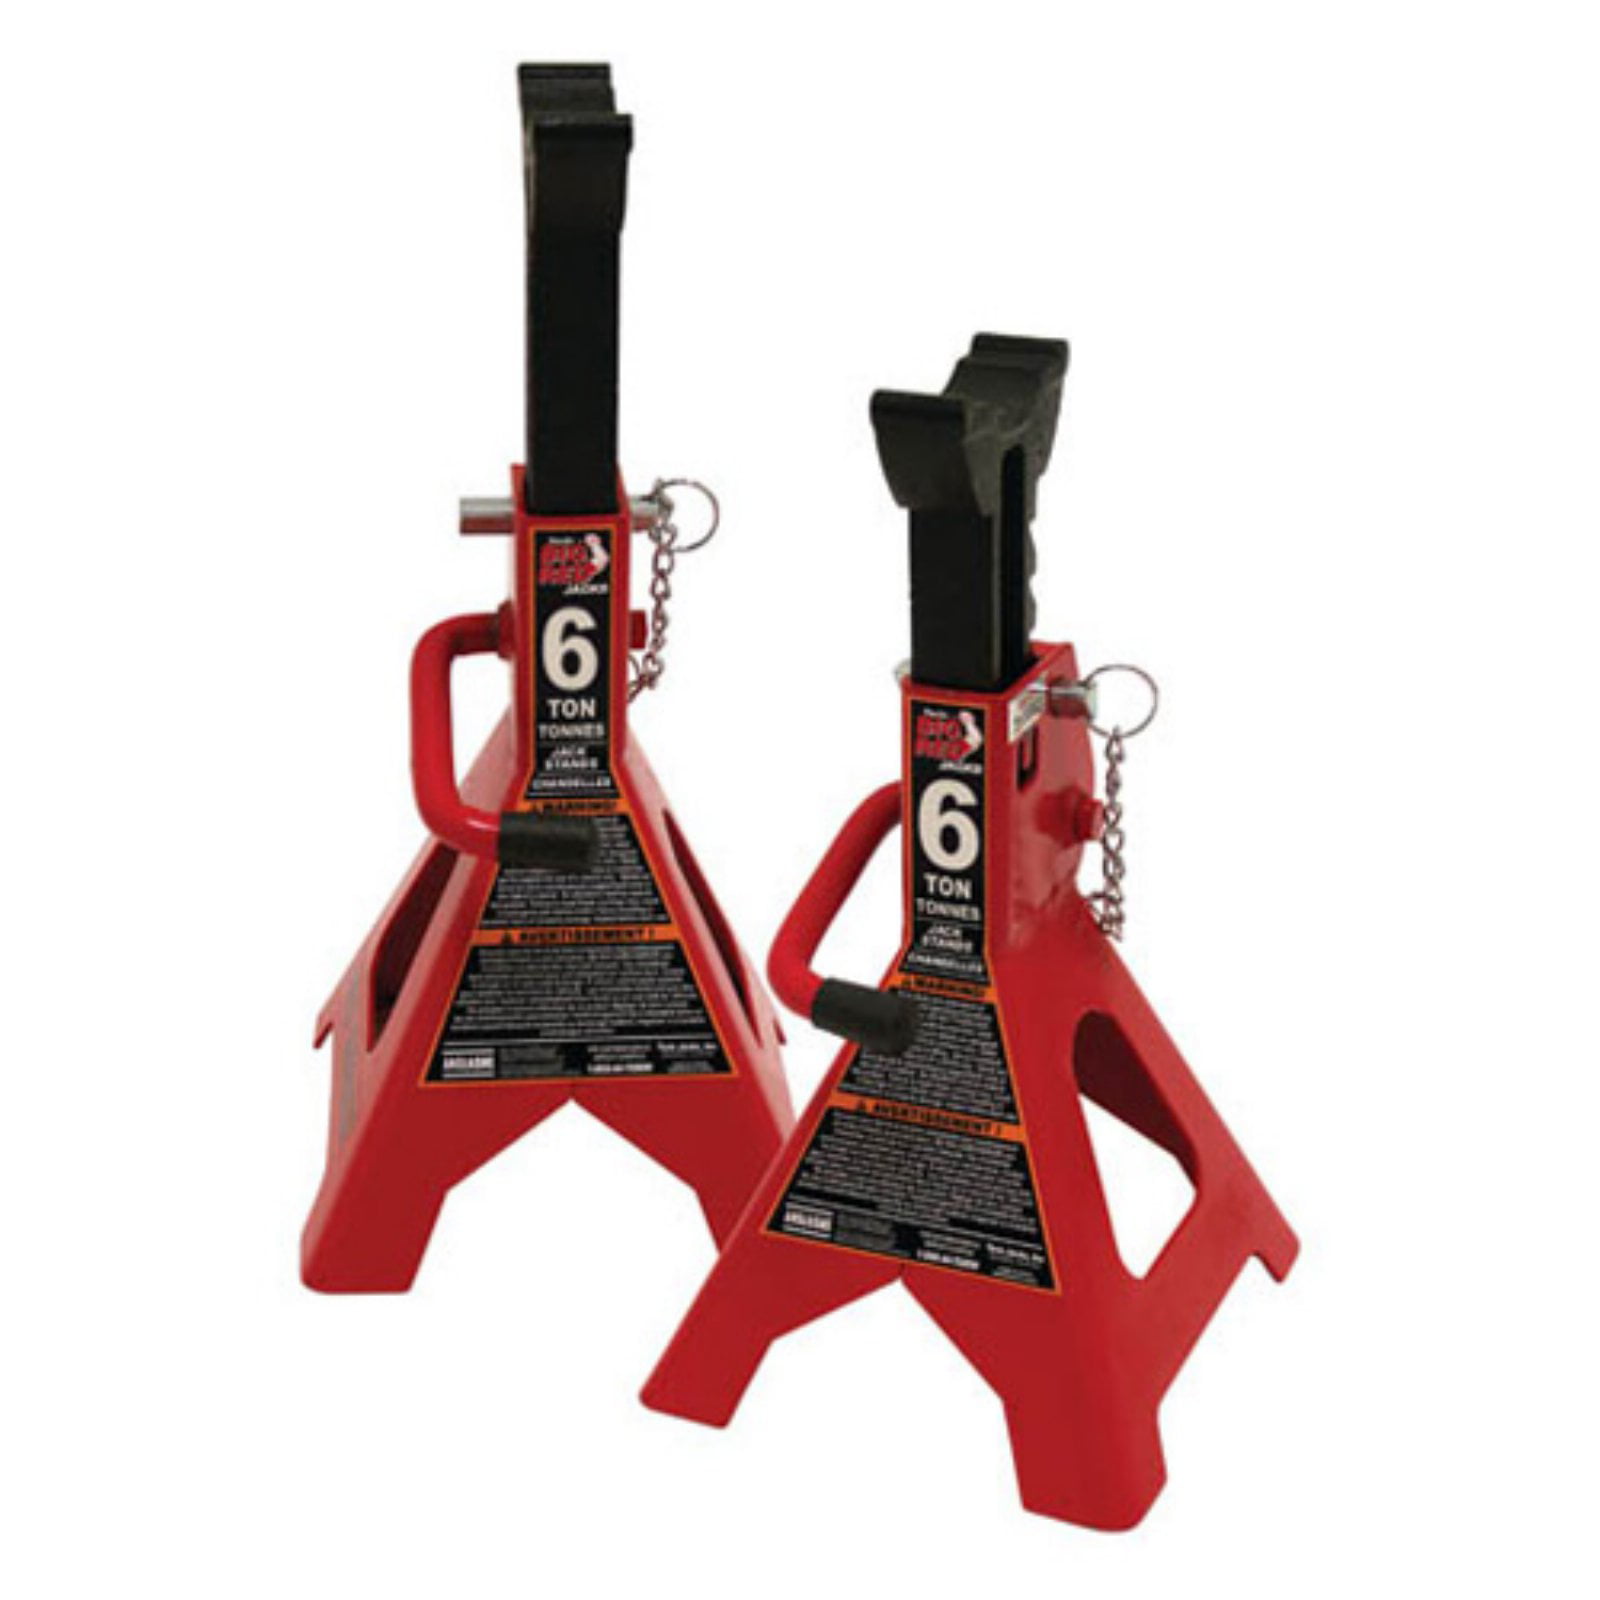 Torin Big Red Steel Jack Stands Double Locking Pawl 6 Ton Capacity 1 Pair Set US 